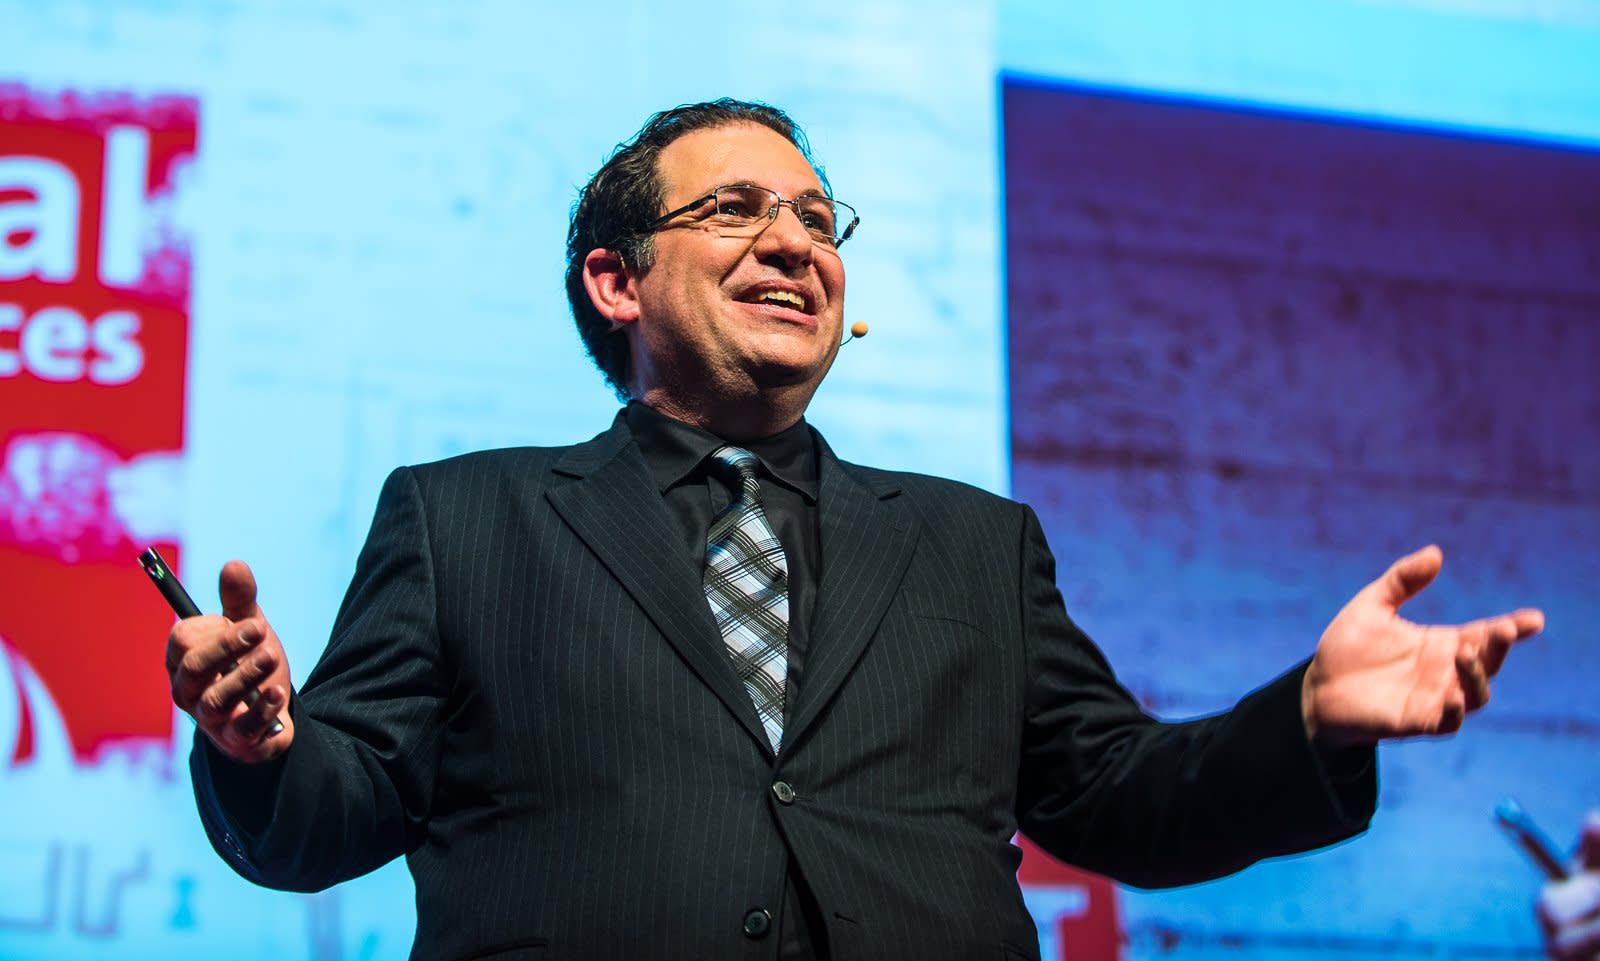 Kevin Mitnick, "The World's Most Famous Hacker," to Give Closing